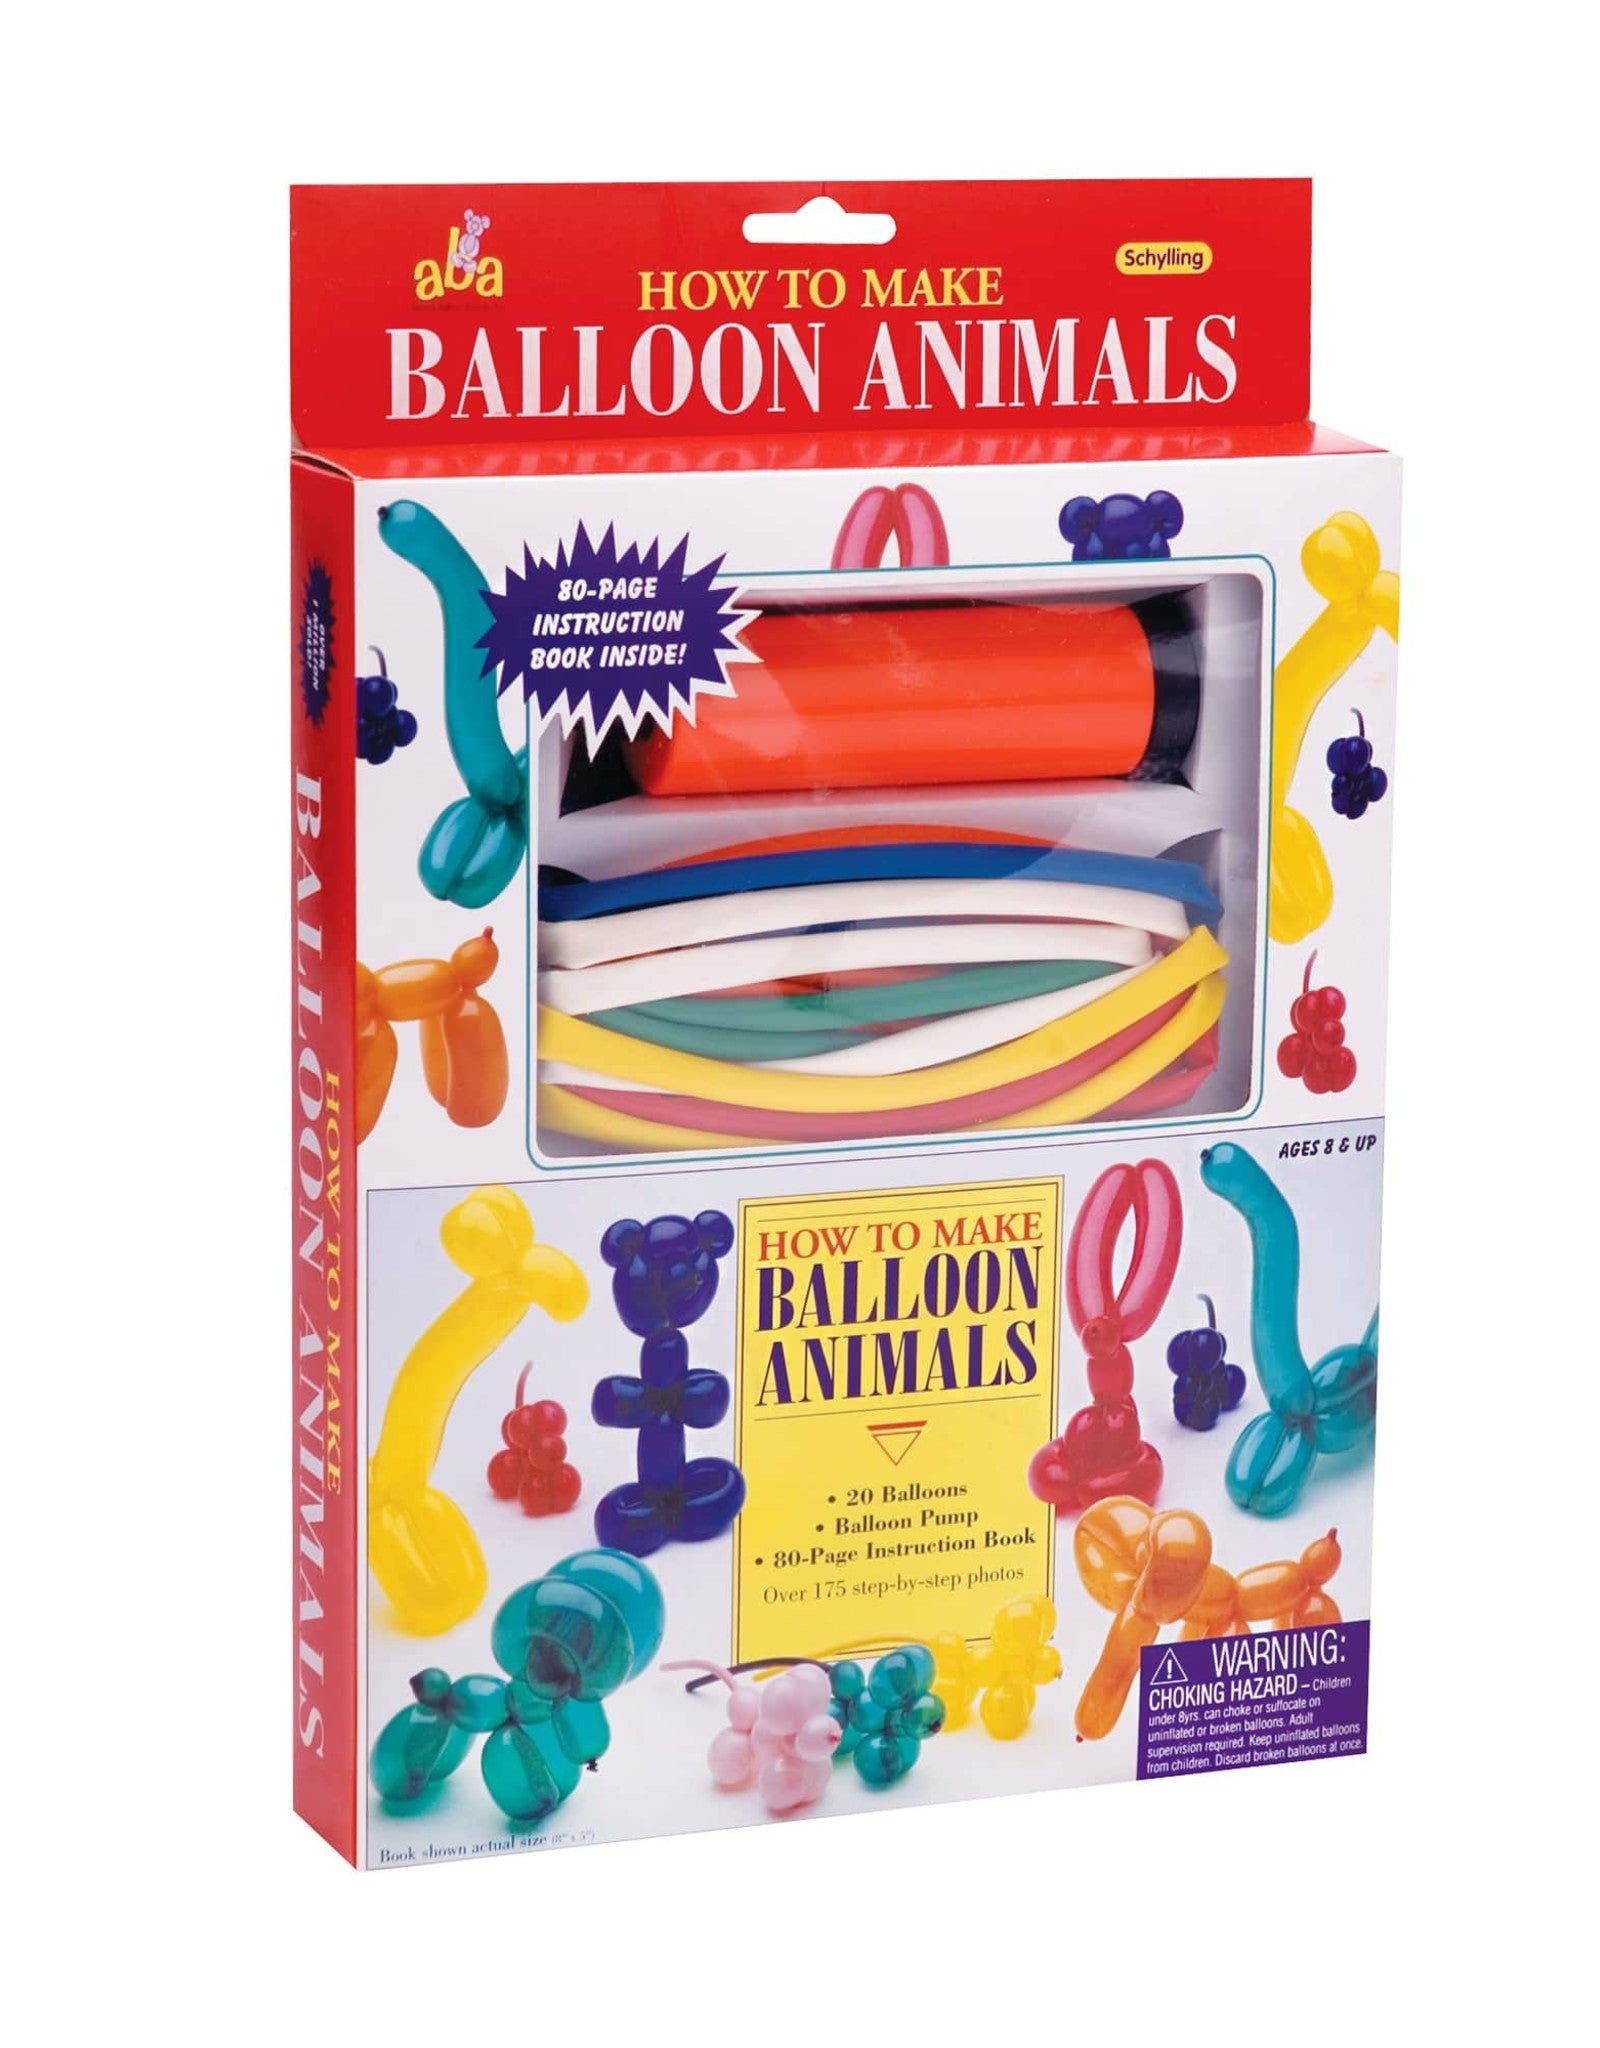 How To Make Balloon Animals - Ages 8+